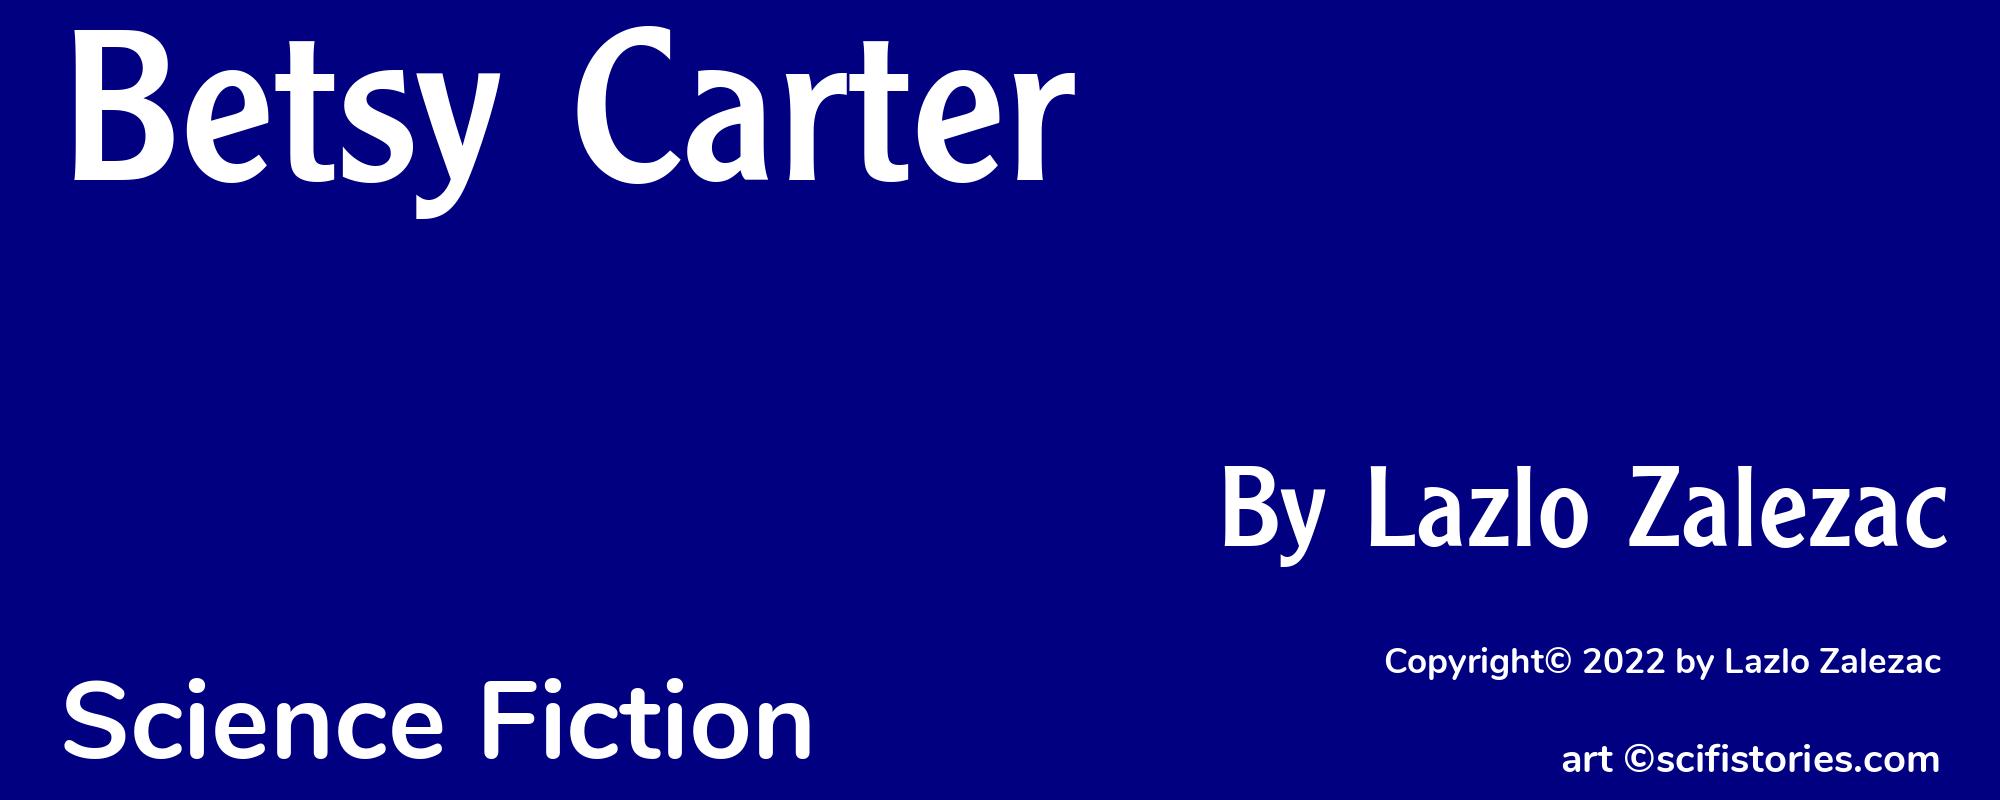 Betsy Carter - Cover